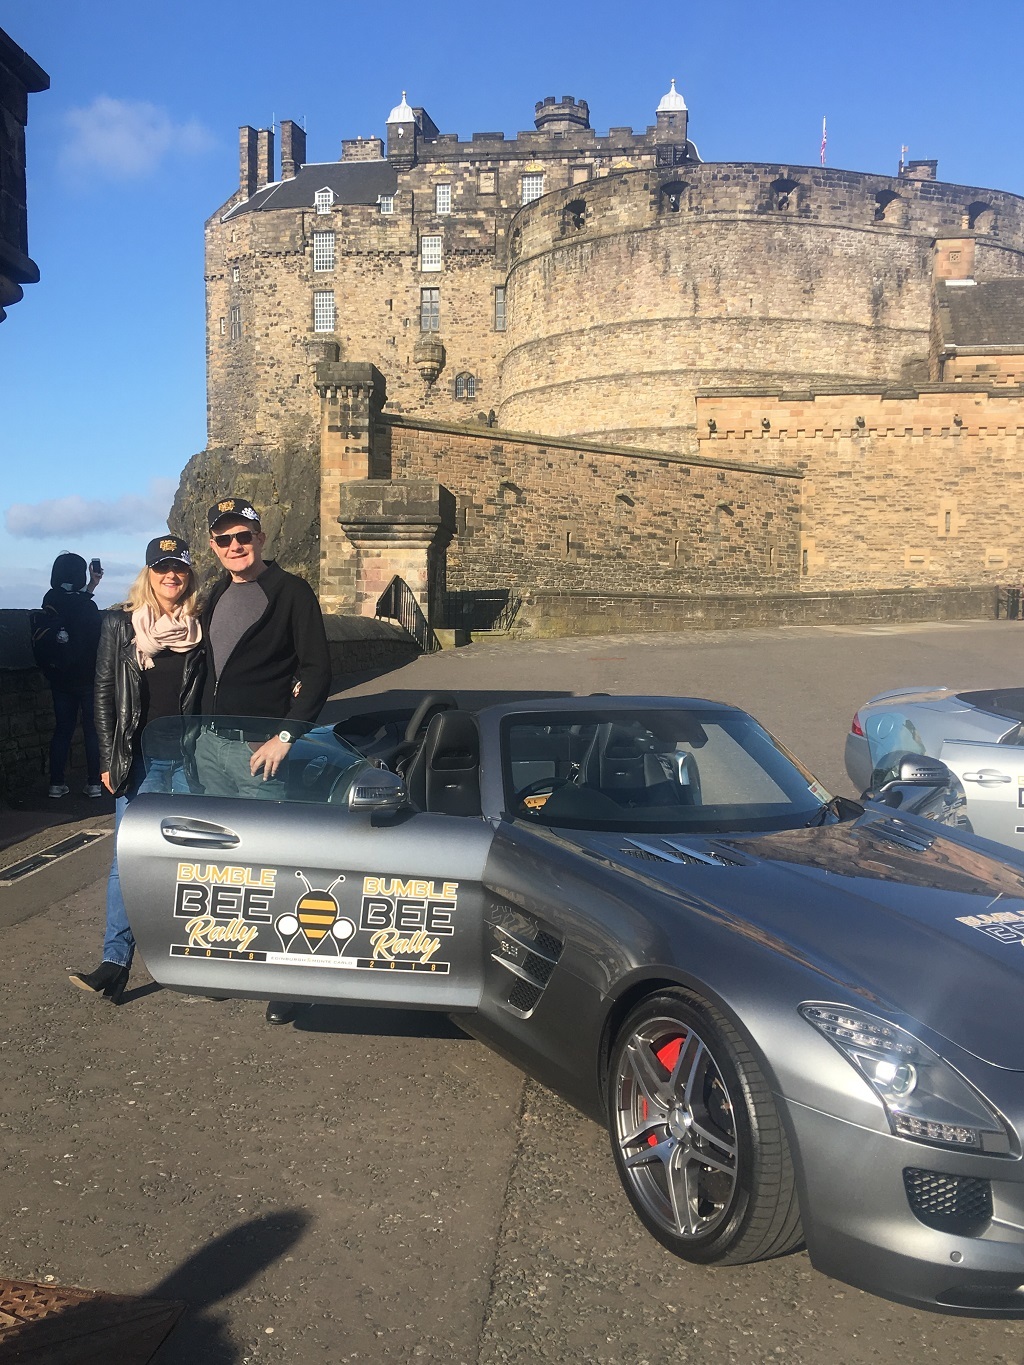 The rally departed from Edinburgh Castle